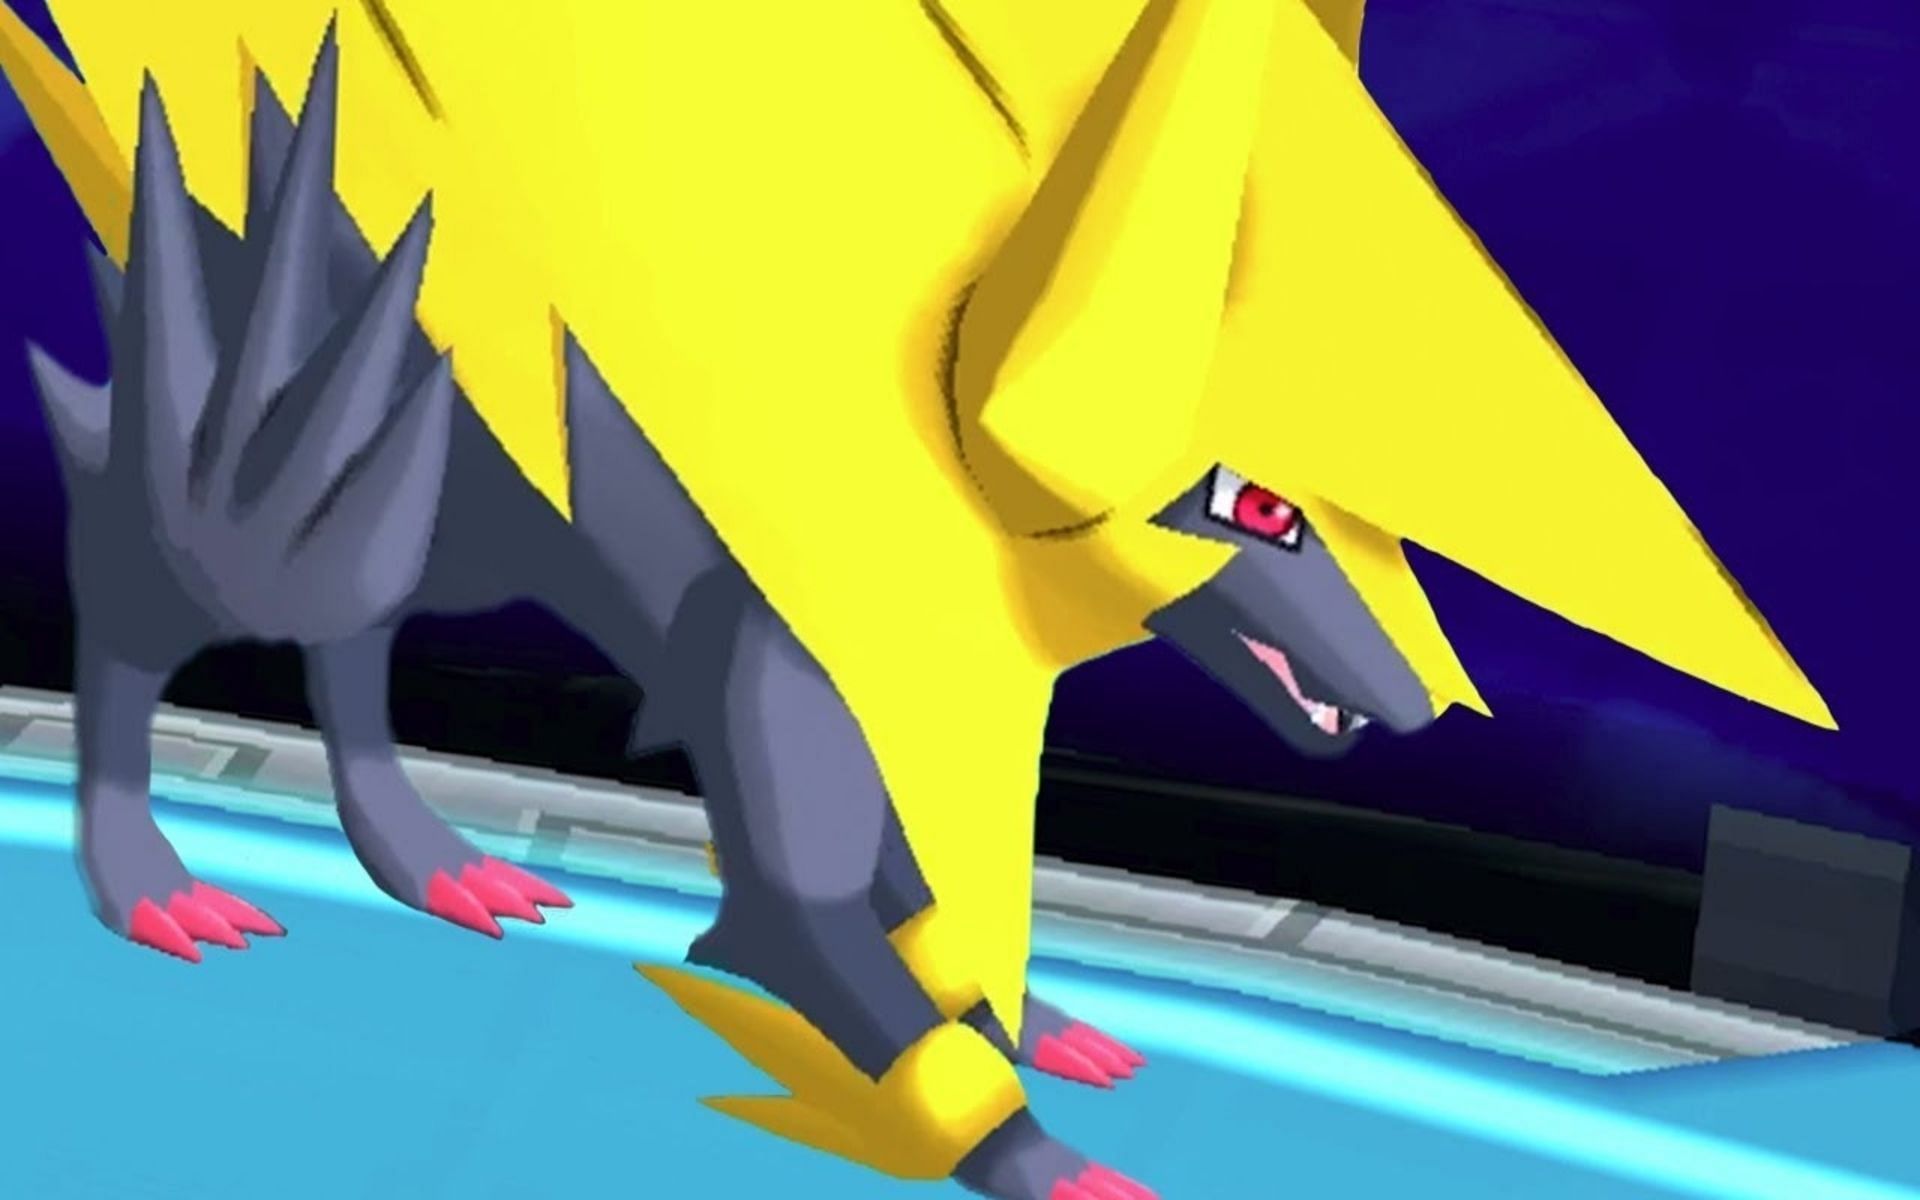 Manectric received a Mega Evolution in the Generation III remakes (Image via Game Freak)